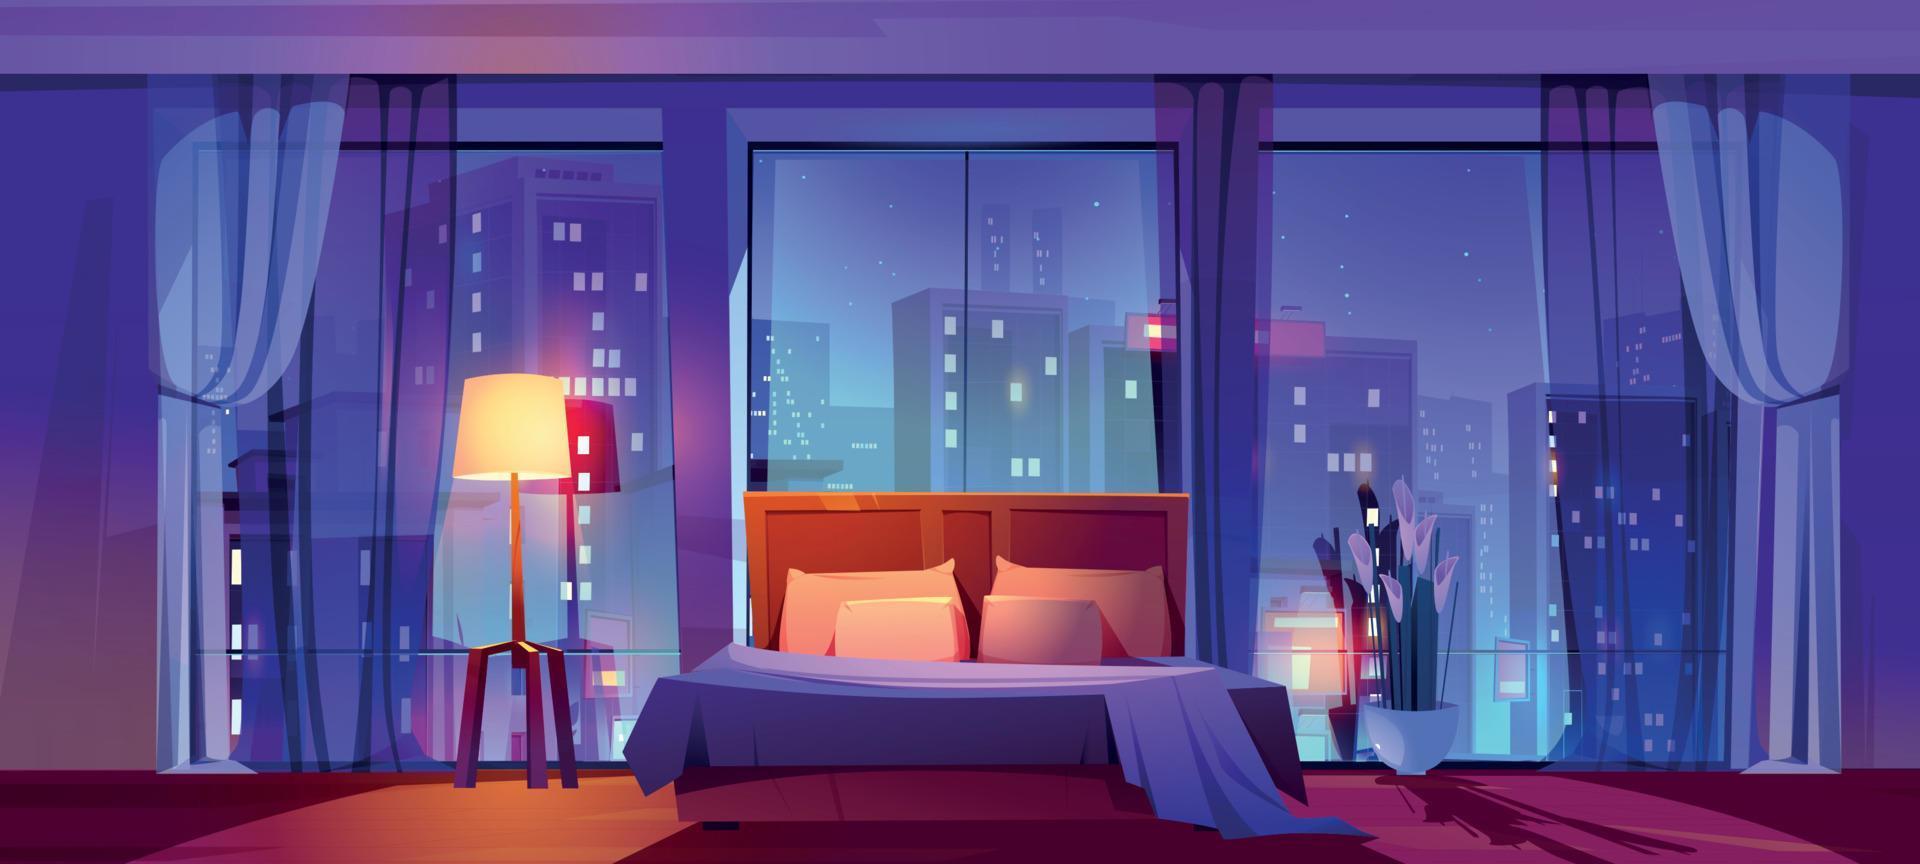 Modern bedroom interior with city view vector